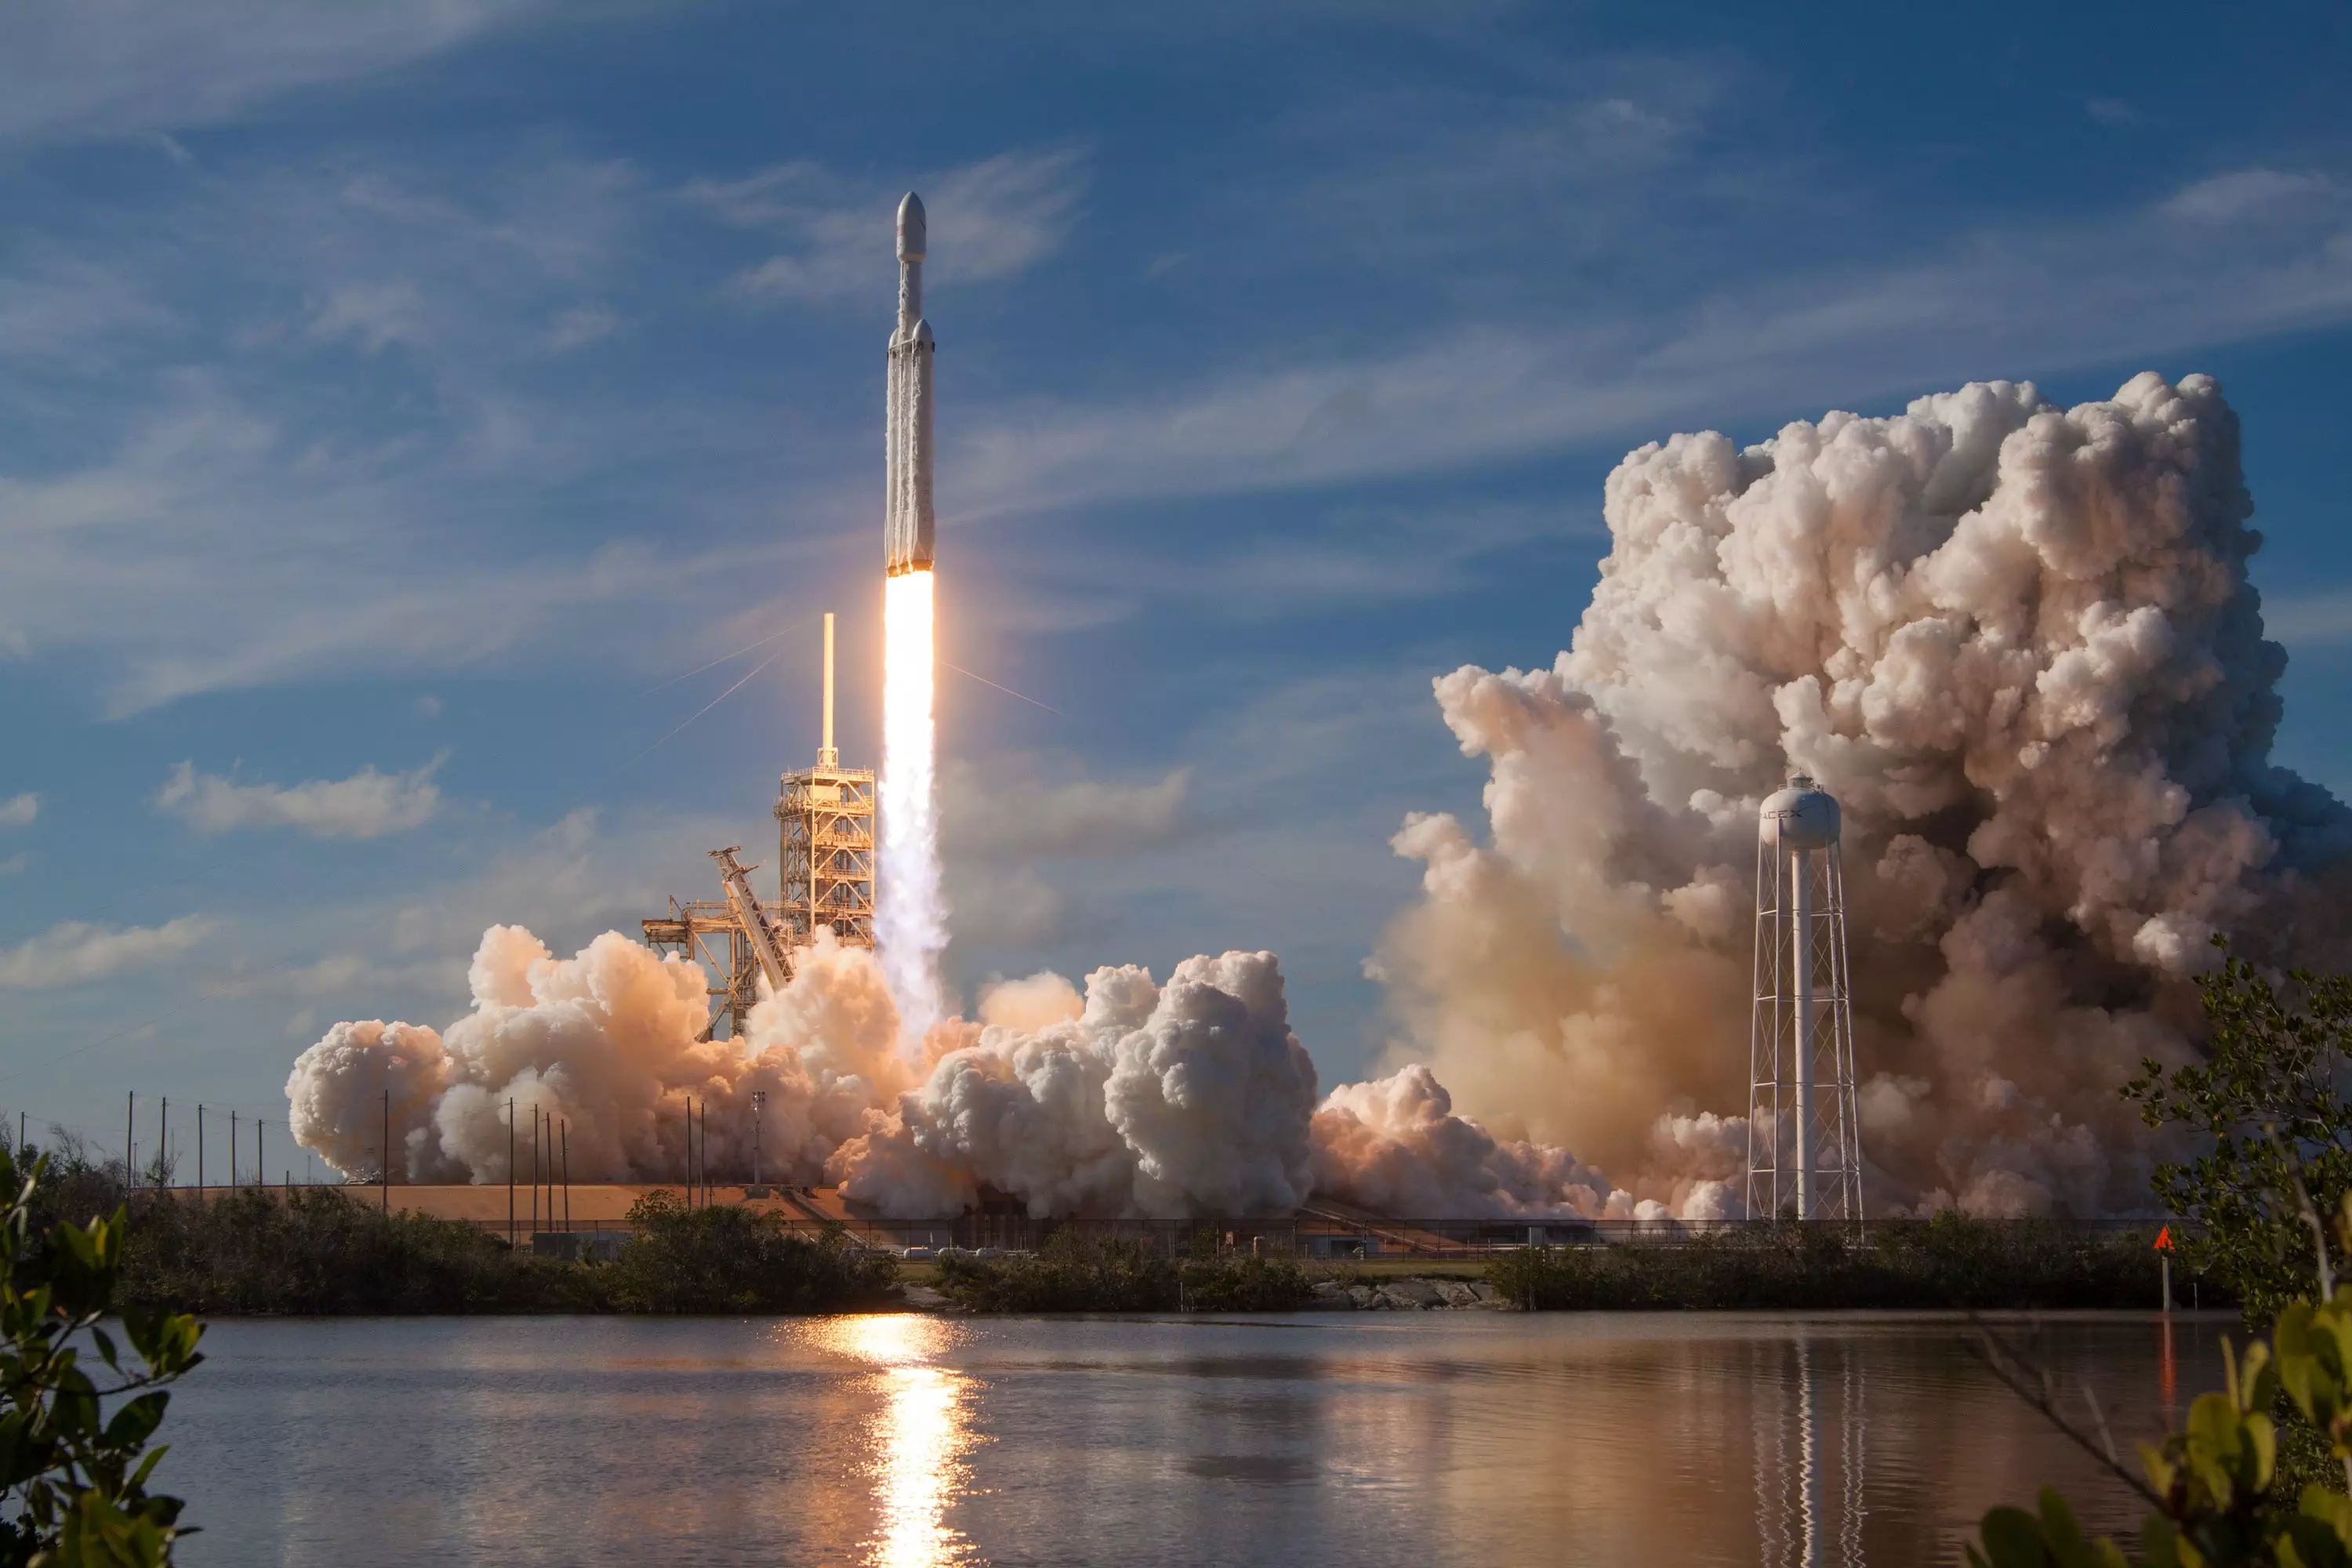 Photo by SpaceX on Unsplash